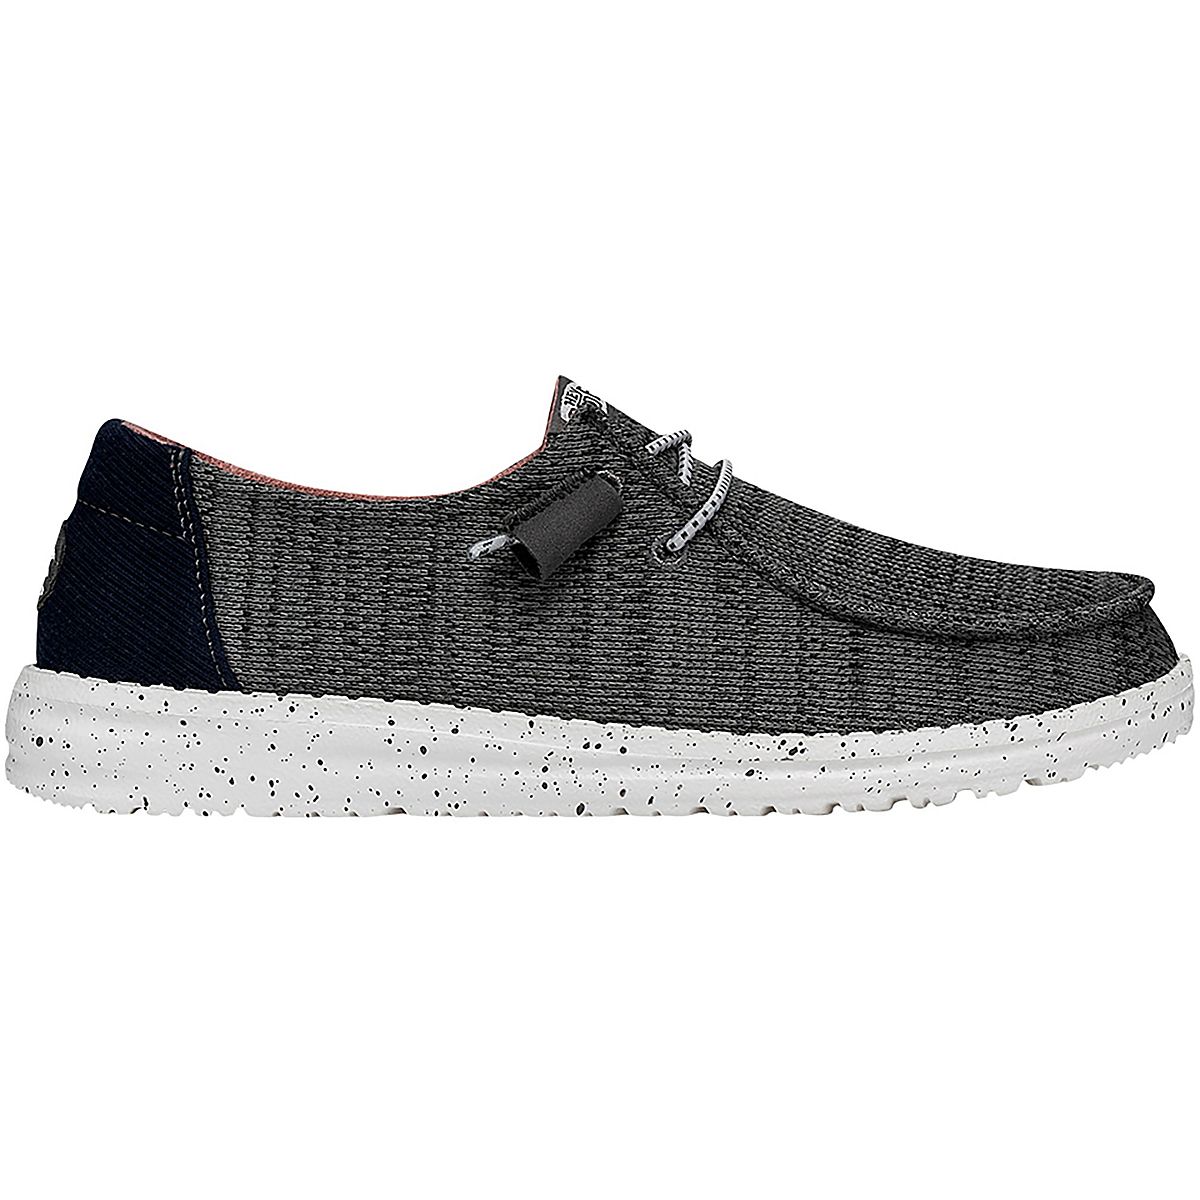 HEYDUDE Women’s Wendy Sport Mesh Shoes | Free Shipping at Academy